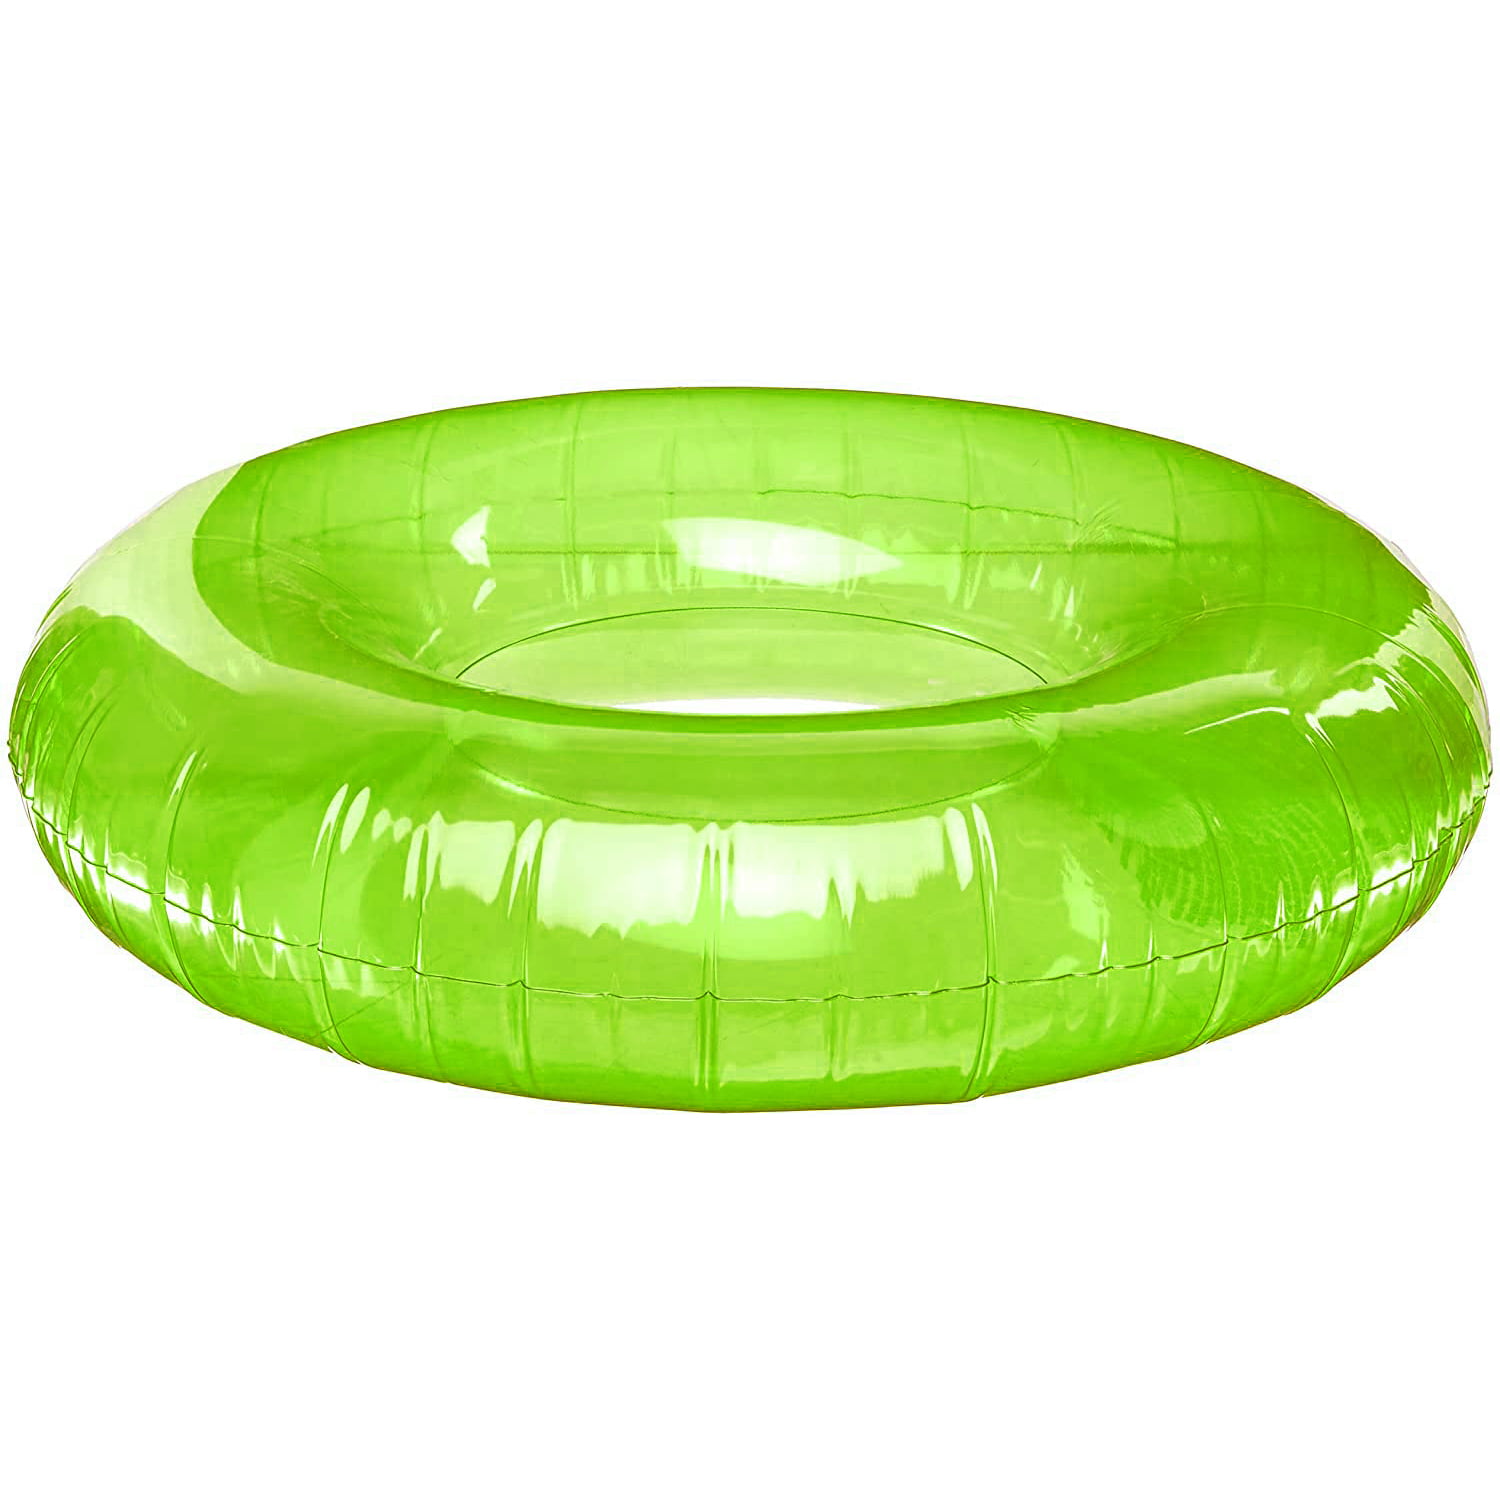 Details about   Kids Clear Color Swimming Tube 3pk Inflatable Ring Pool Float Fun Toy 30in Dia 